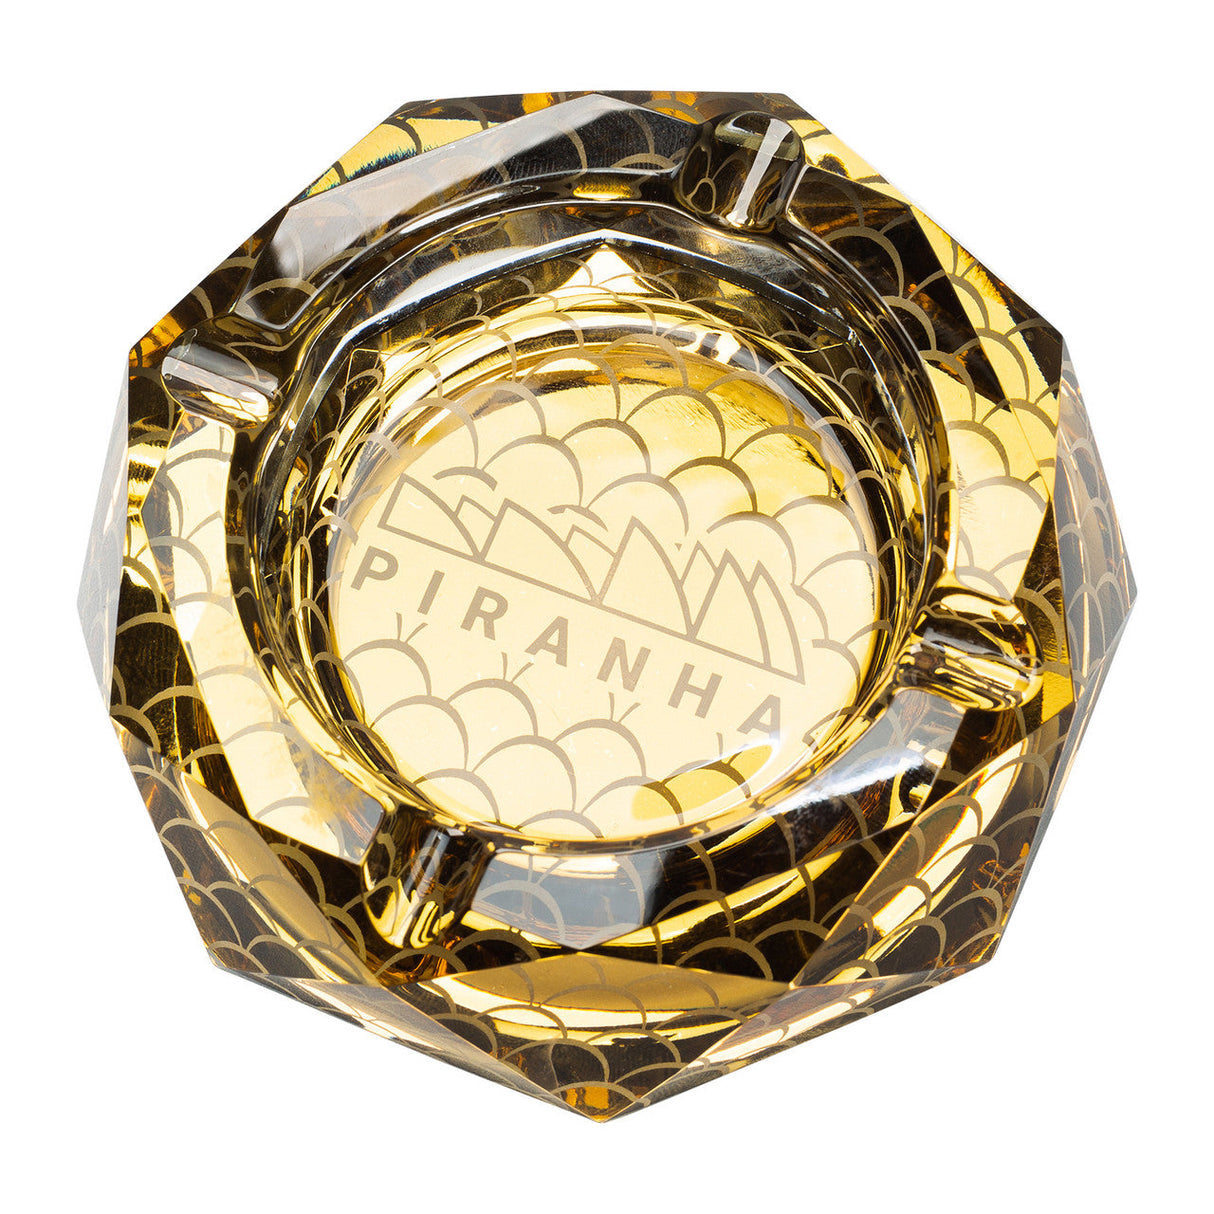 Piranha Glass Anise Star Ashtray with gold scales pattern, thick borosilicate glass, top view